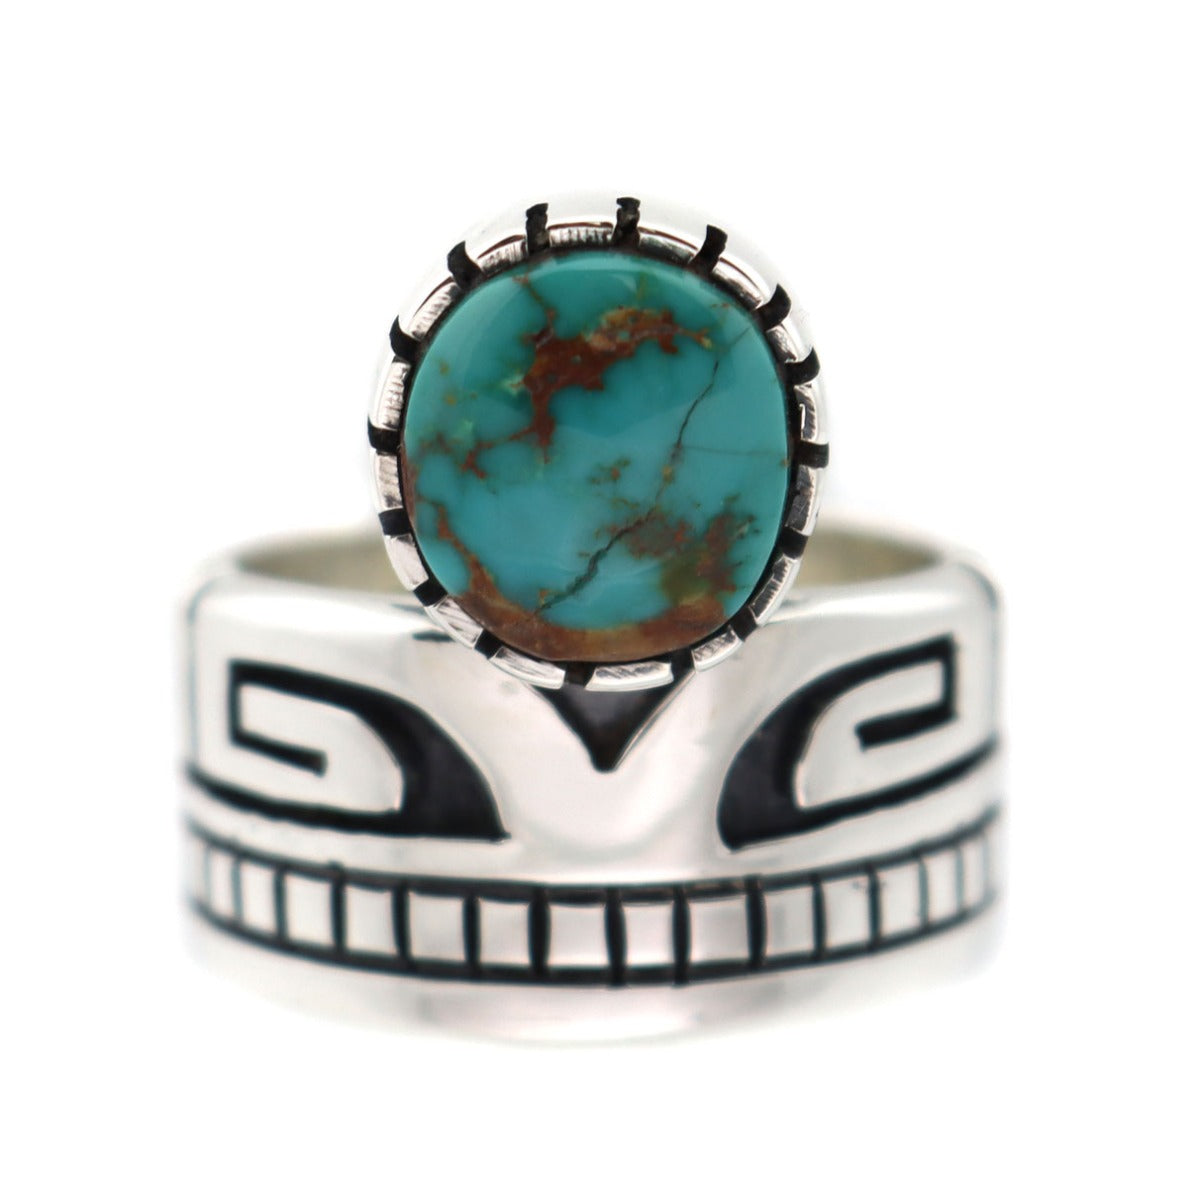 Roy Talahaftewa - Hopi Contemporary Turquoise and Silver Overlay Ring, size 9 (J14265)